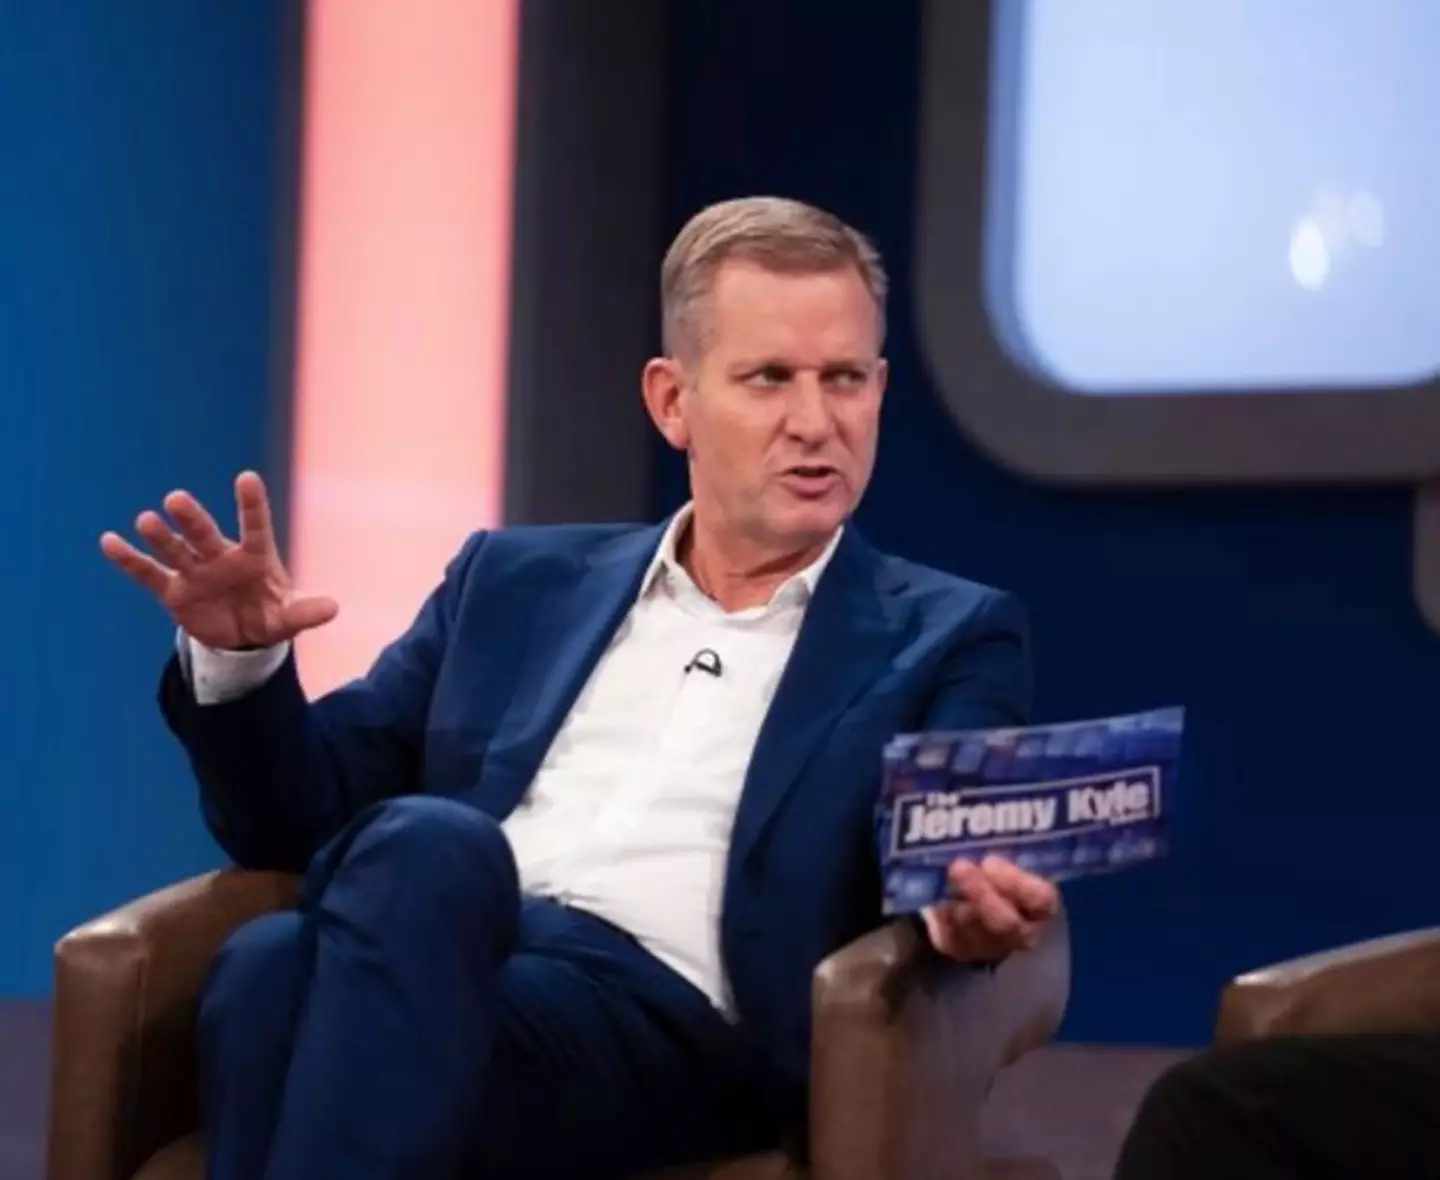 The Jeremy Kyle Show was cancelled back in 2019.